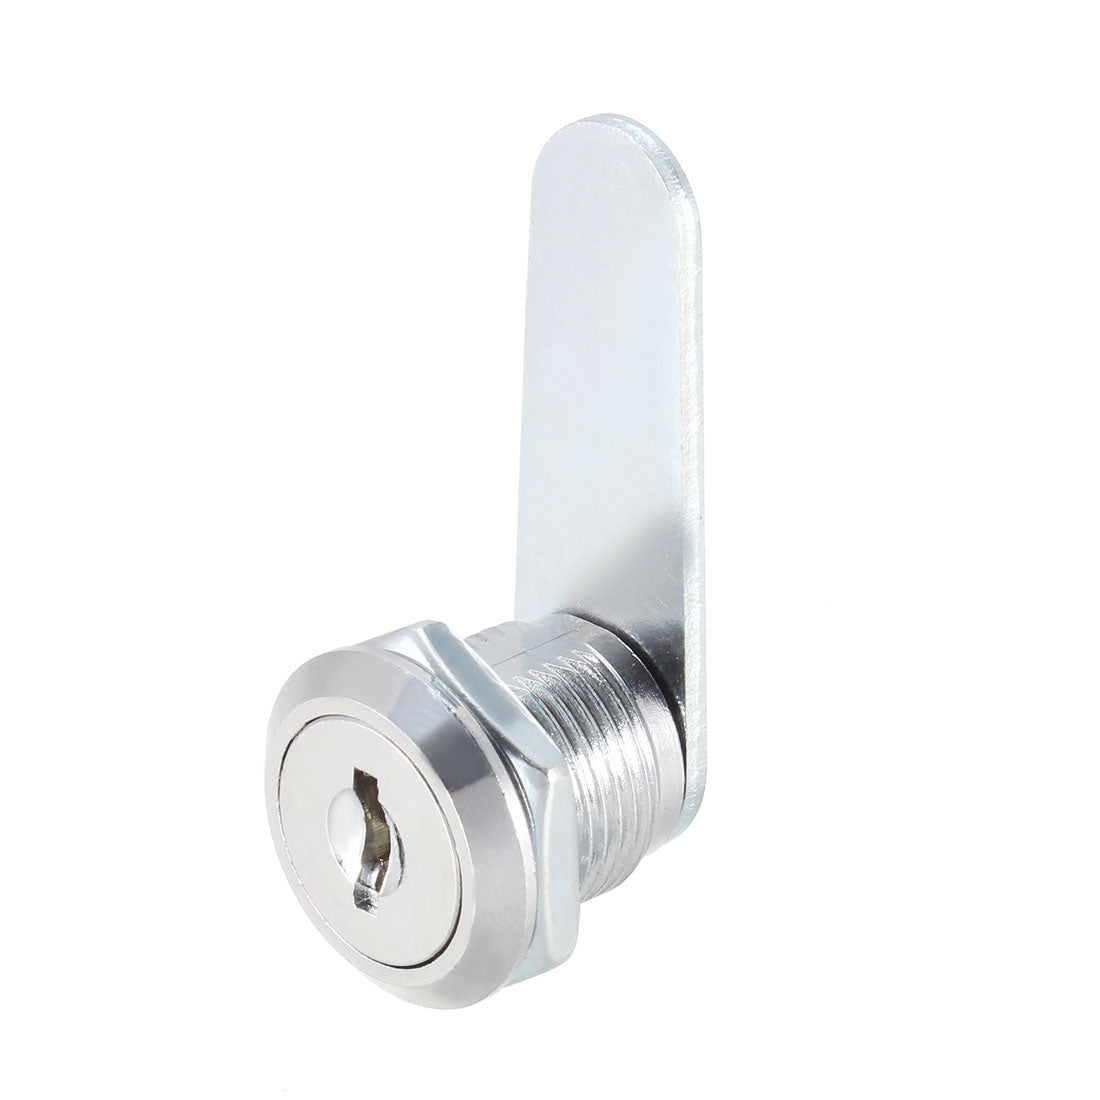 Uxcell Uxcell Cam Lock 30mm Cylinder Length Fits Max 7/8-inch Thick Panel Keyed Alike 4Pcs